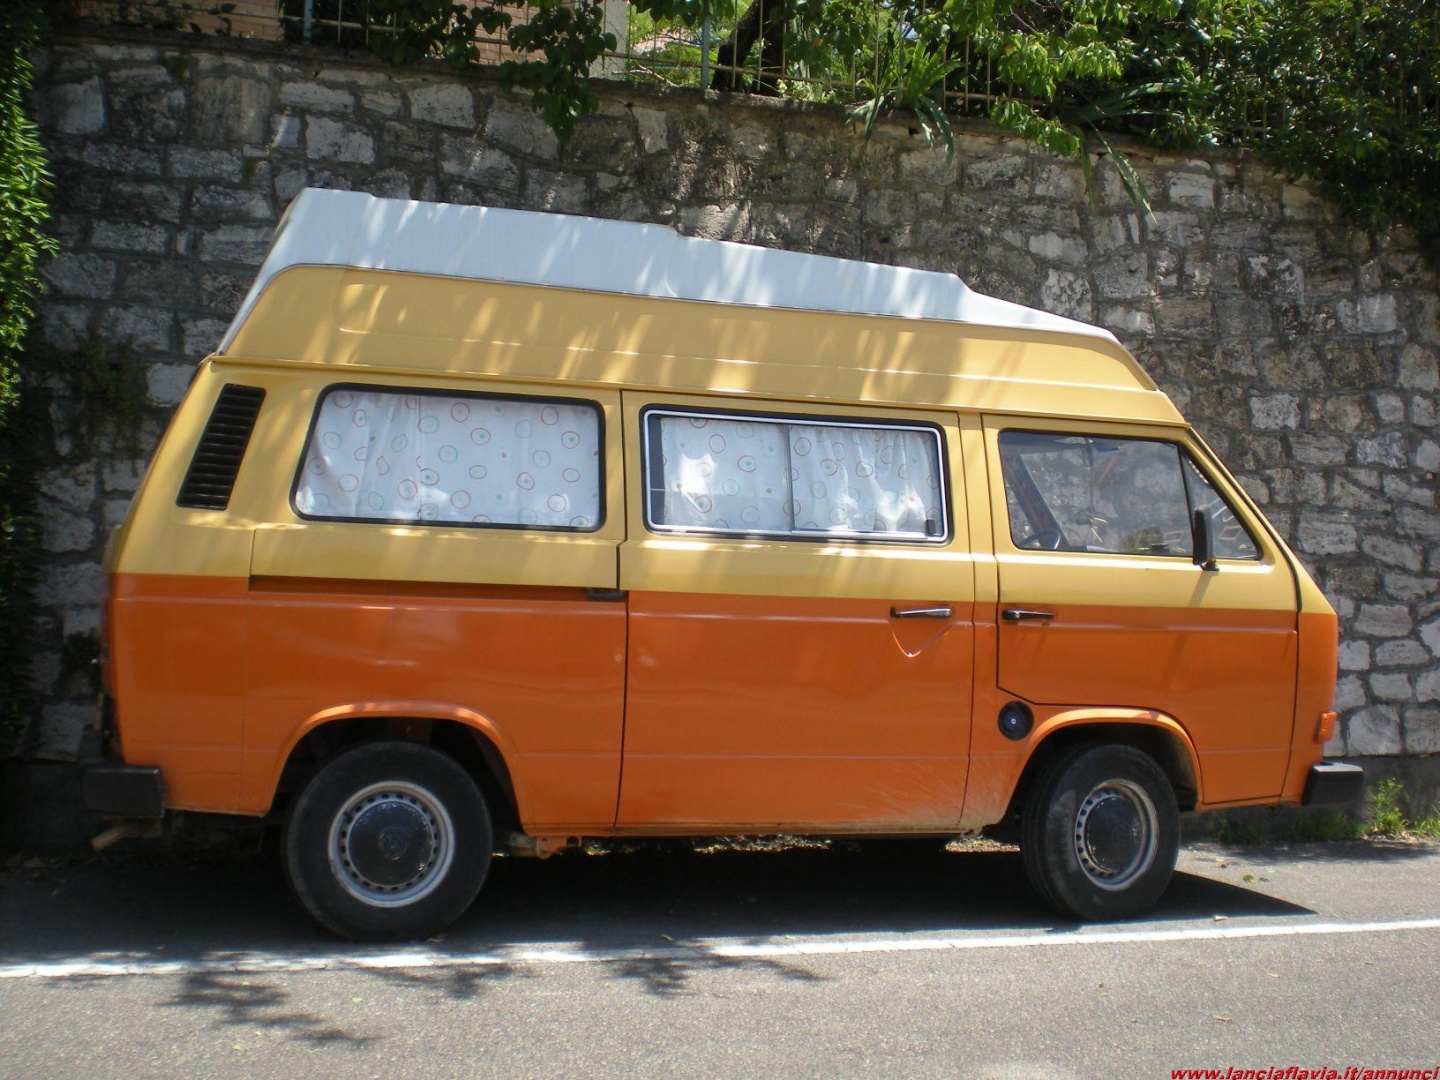 Find Volkswagen T3 camper for sale - AutoScout24